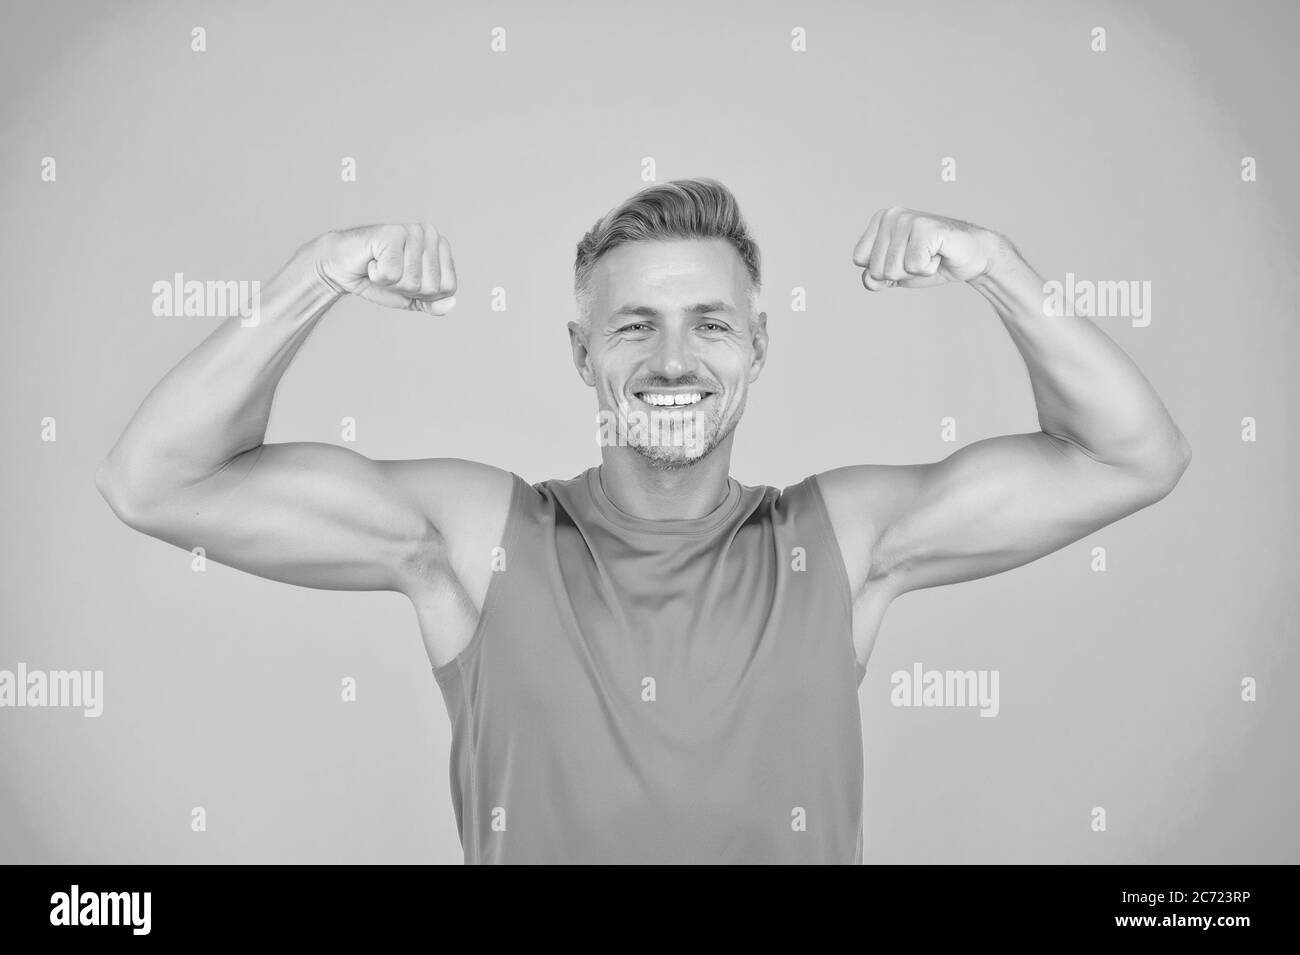 Stay strong in your life. Happy athlete show physical strength. Strong man flex arms blue background. Building strong biceps and triceps. Strong muscle workout. Sport and fitness. Get stronger. Stock Photo